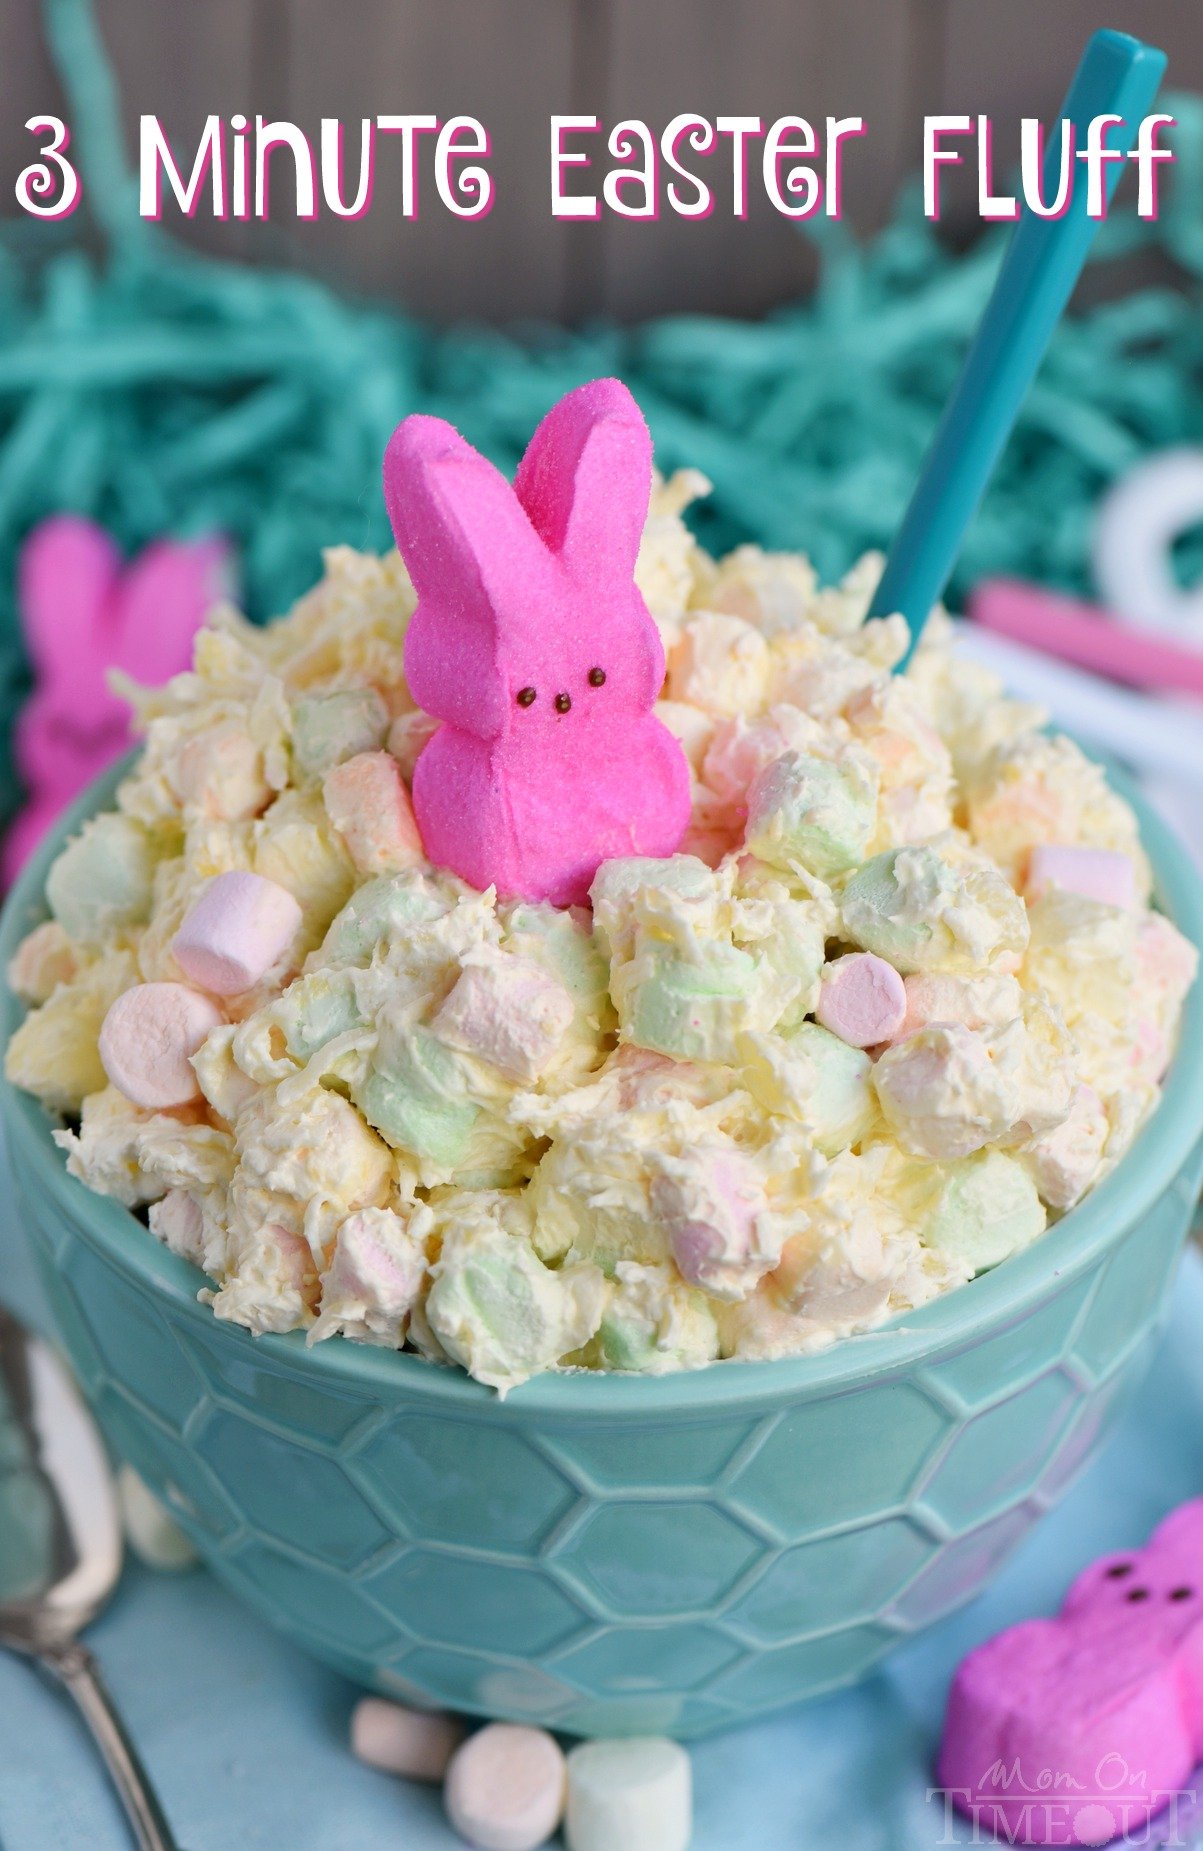 fluff salad in green egg bowl with pink marshmallow peep on top and text overlay.